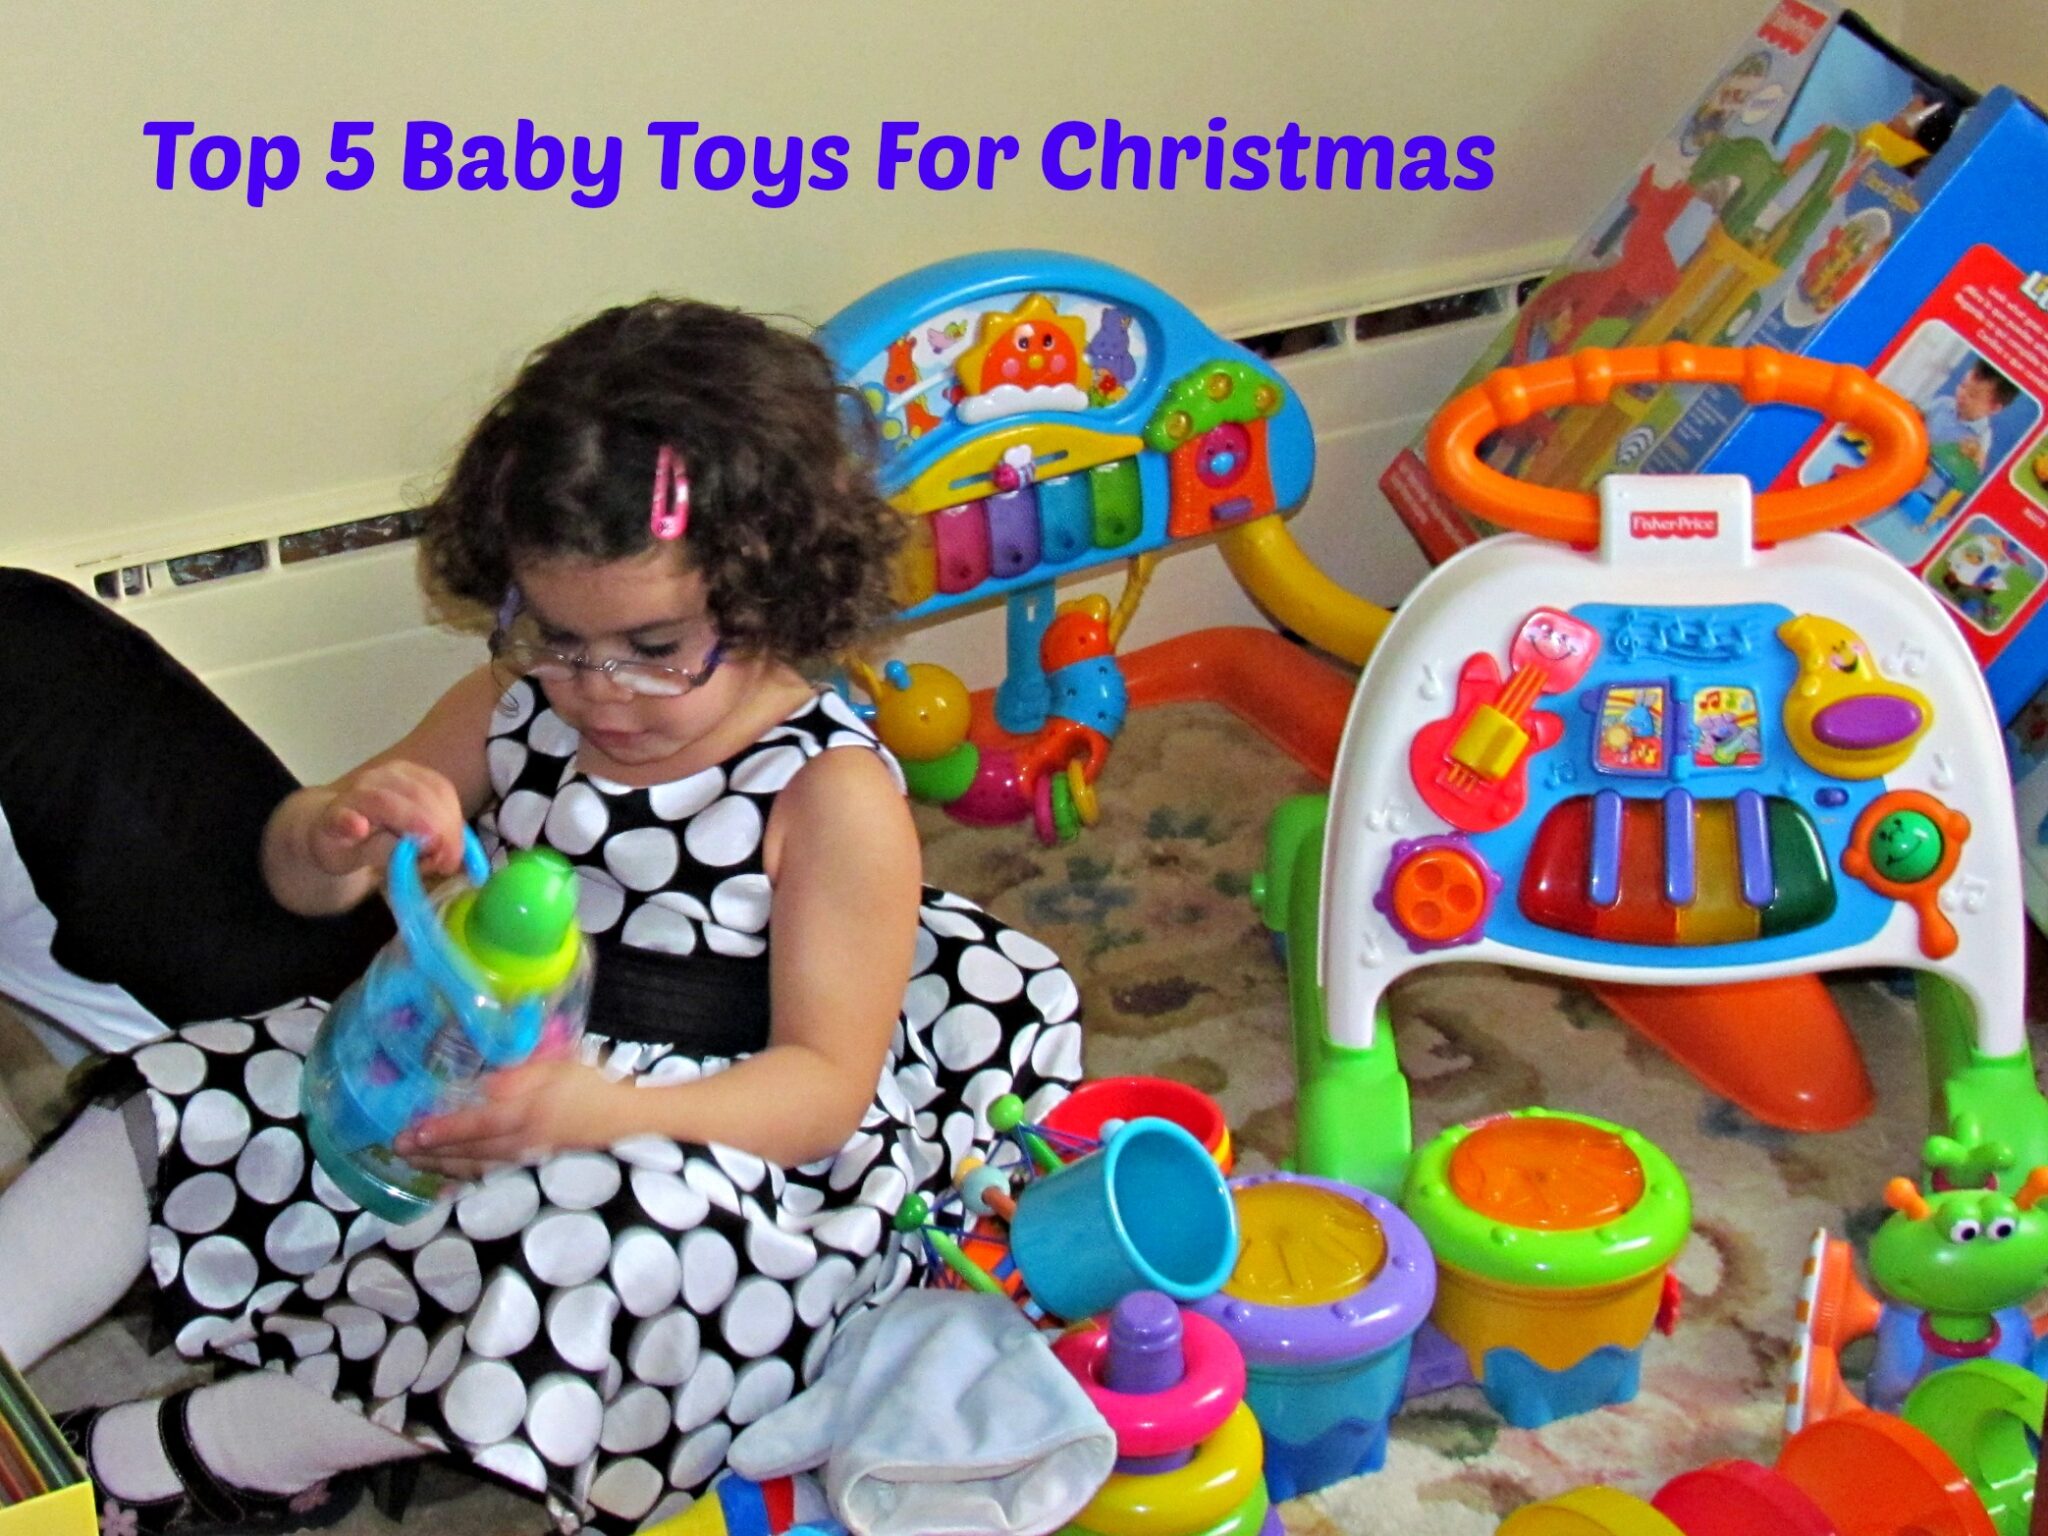 Top 5 Baby Toys for Christmas